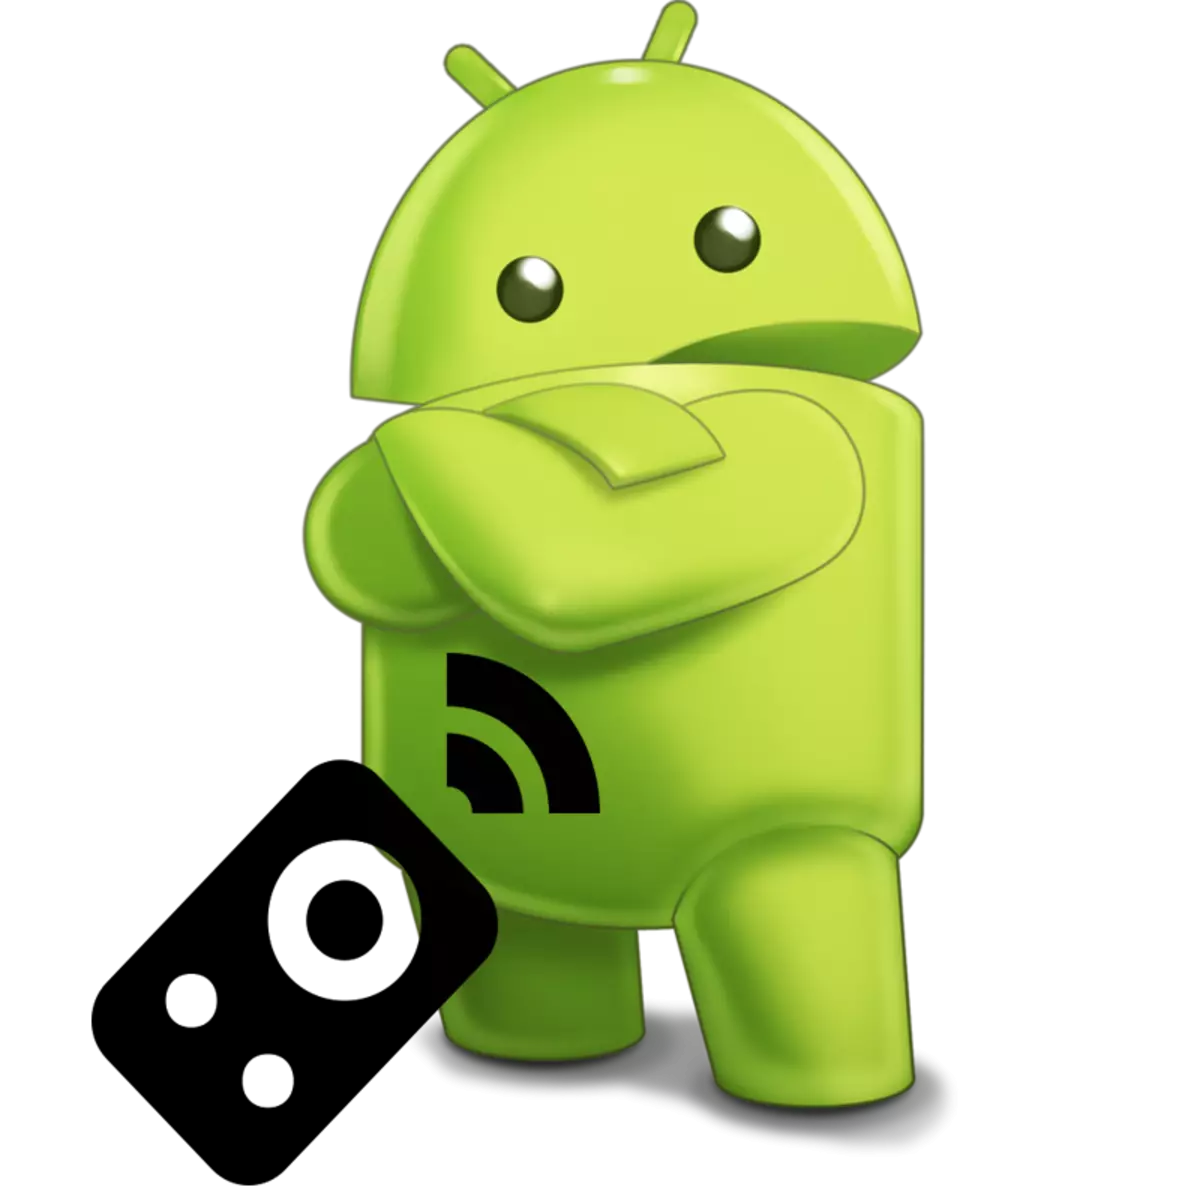 Android remoto